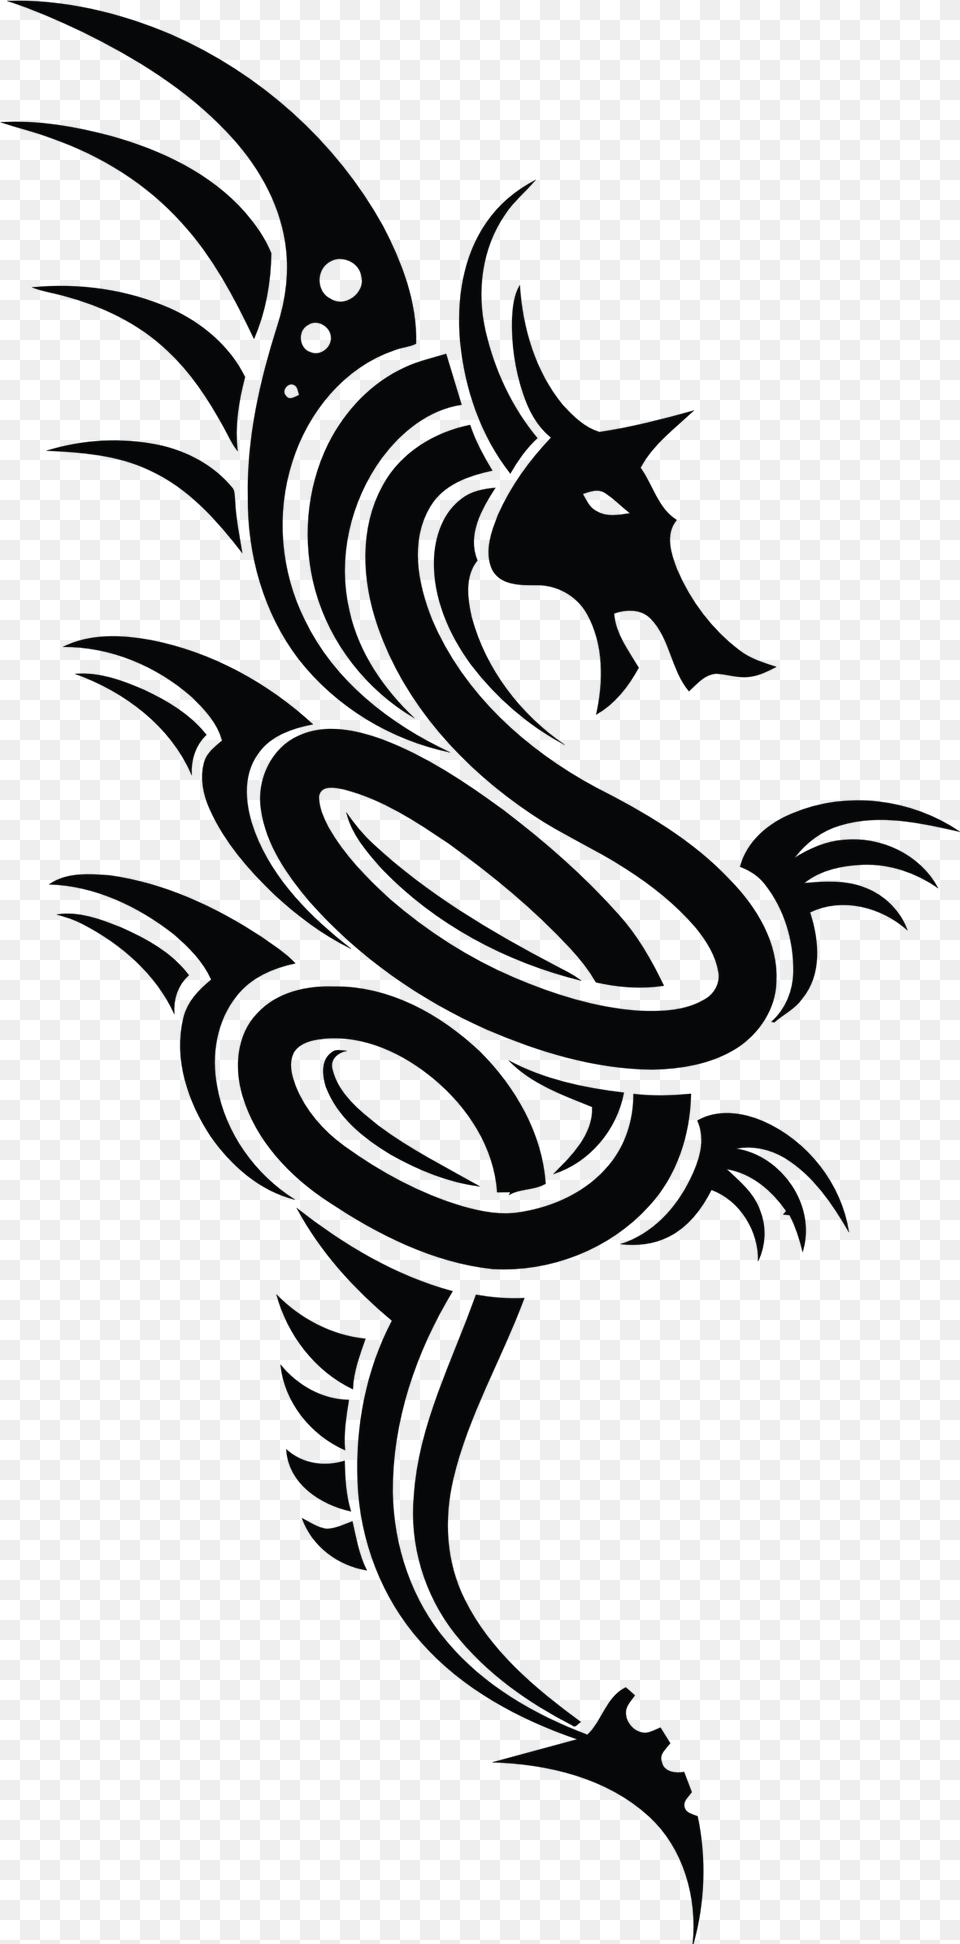 Hand Tattoo Dragon Tattoo Vector Png Image